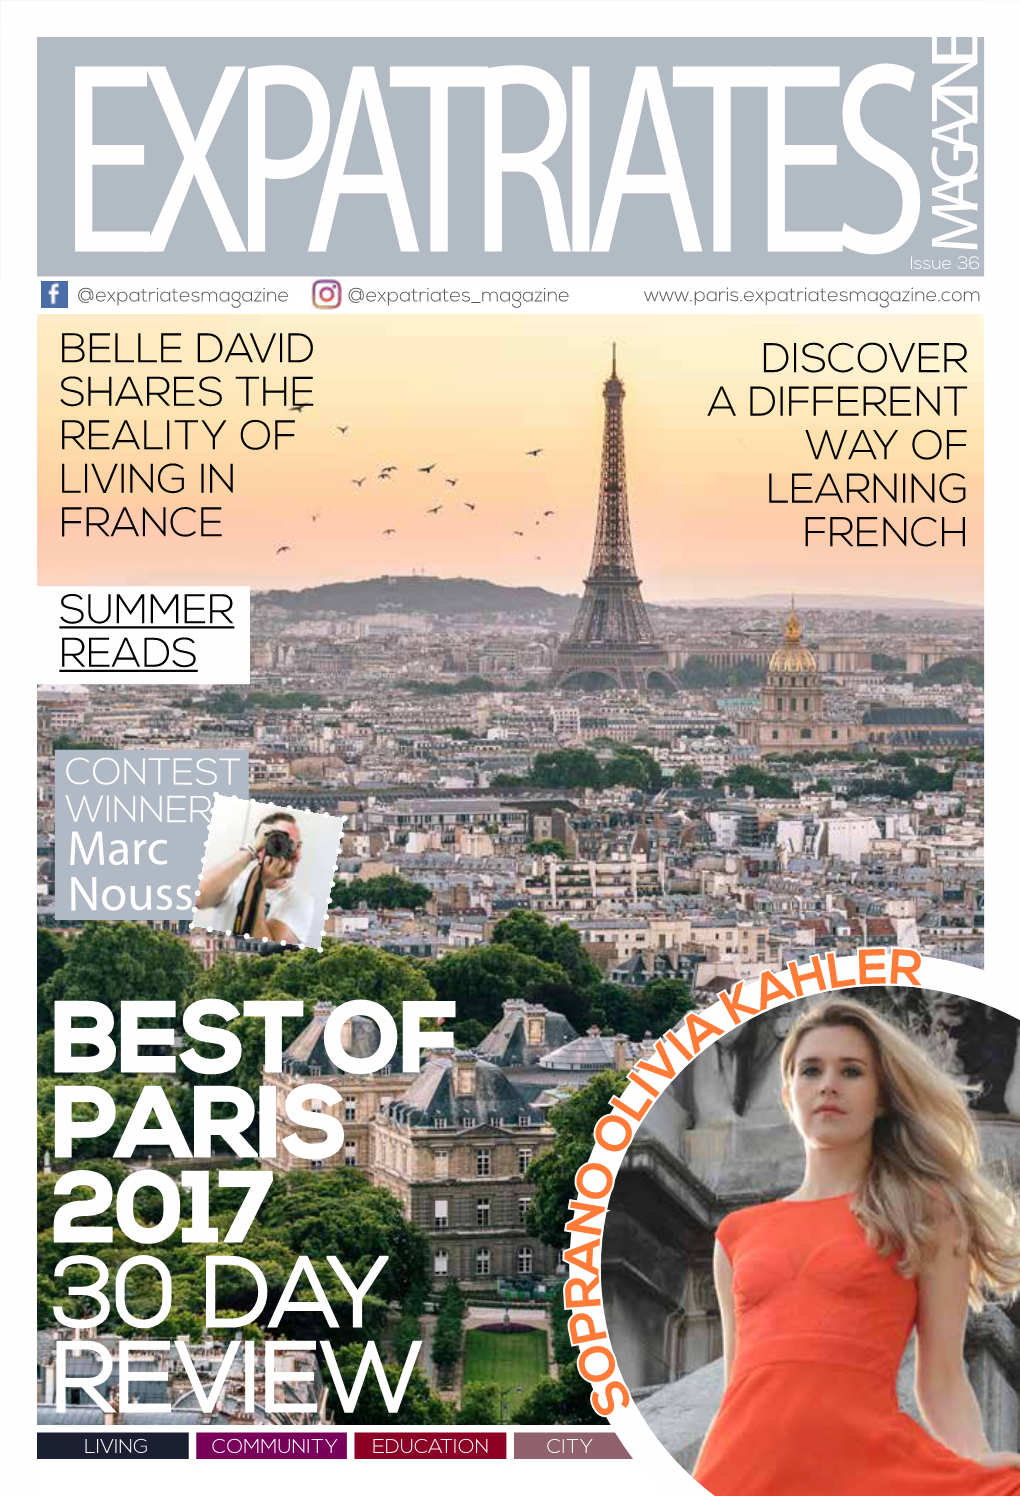 BEST of PARIS 2017 30 DAY REVIEW 1H SIGHTSEEING CRUISE 18 WELCOME to REALITY Every Day, by Day Or by Night